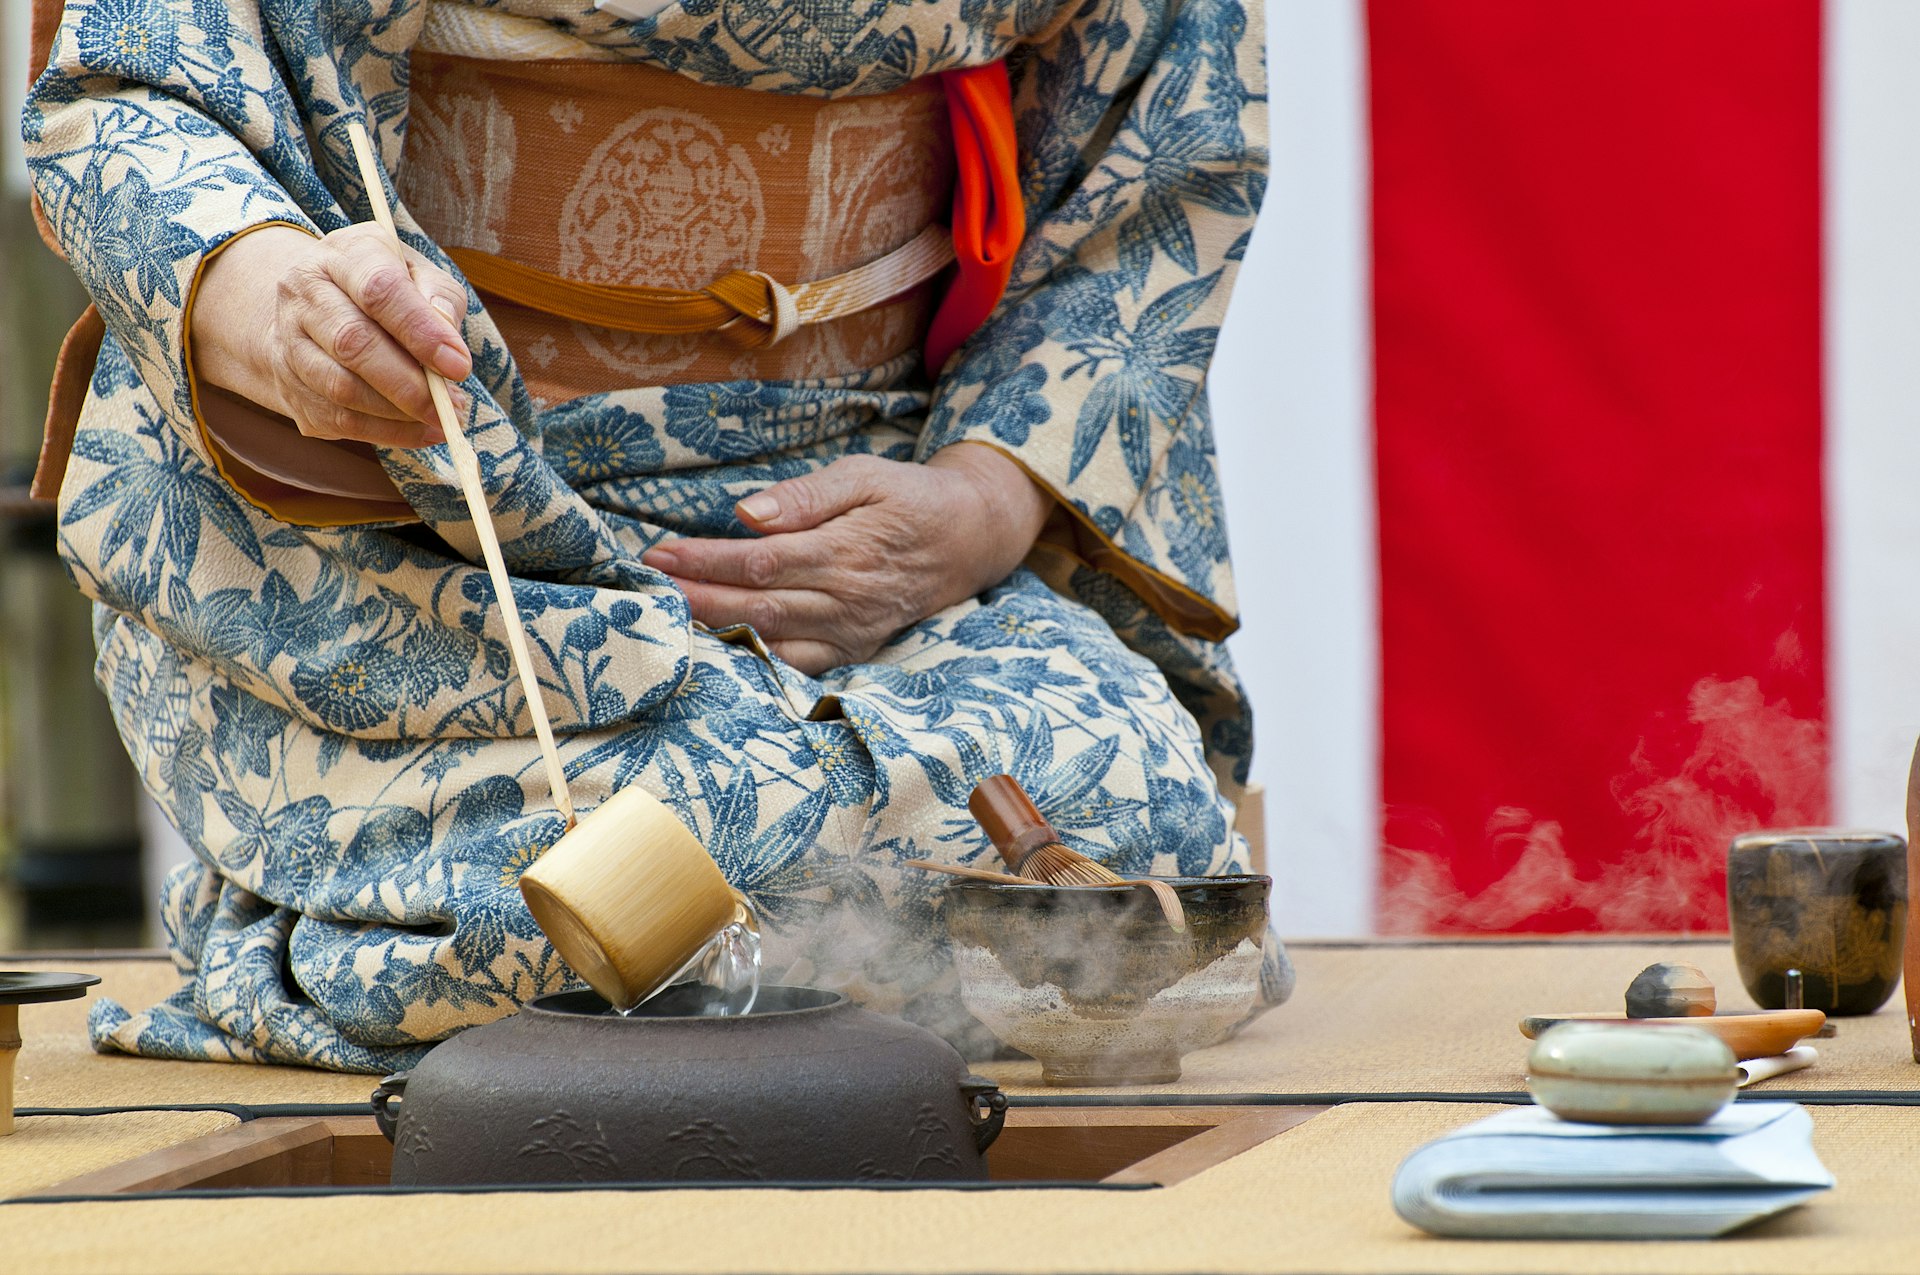 A person wearing a kimono kneels as they pour hot water